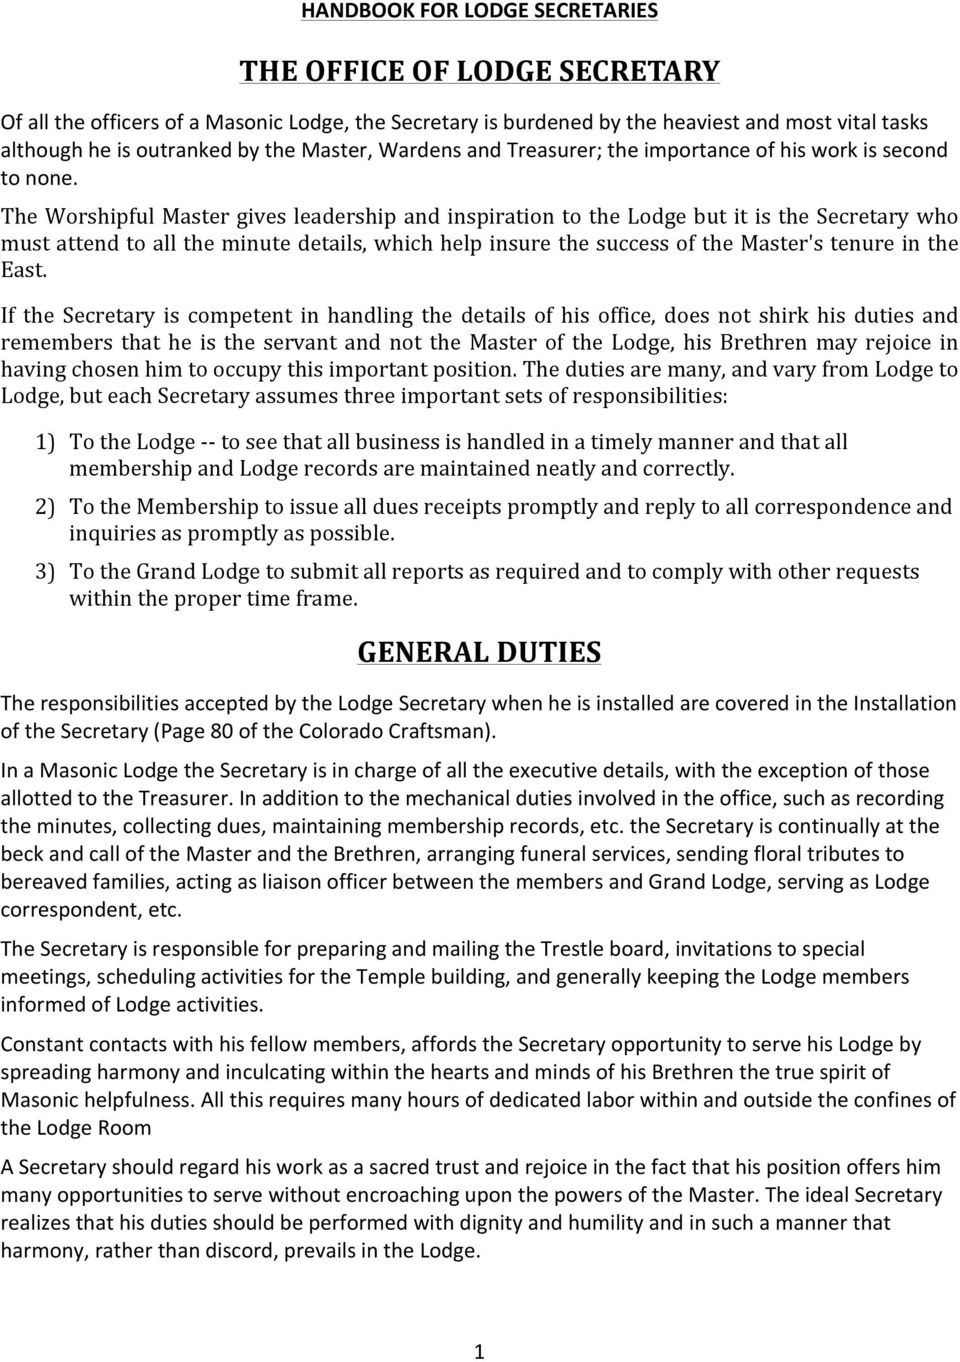 Masonic Meeting Minutes Template intended for size 960 X 1362